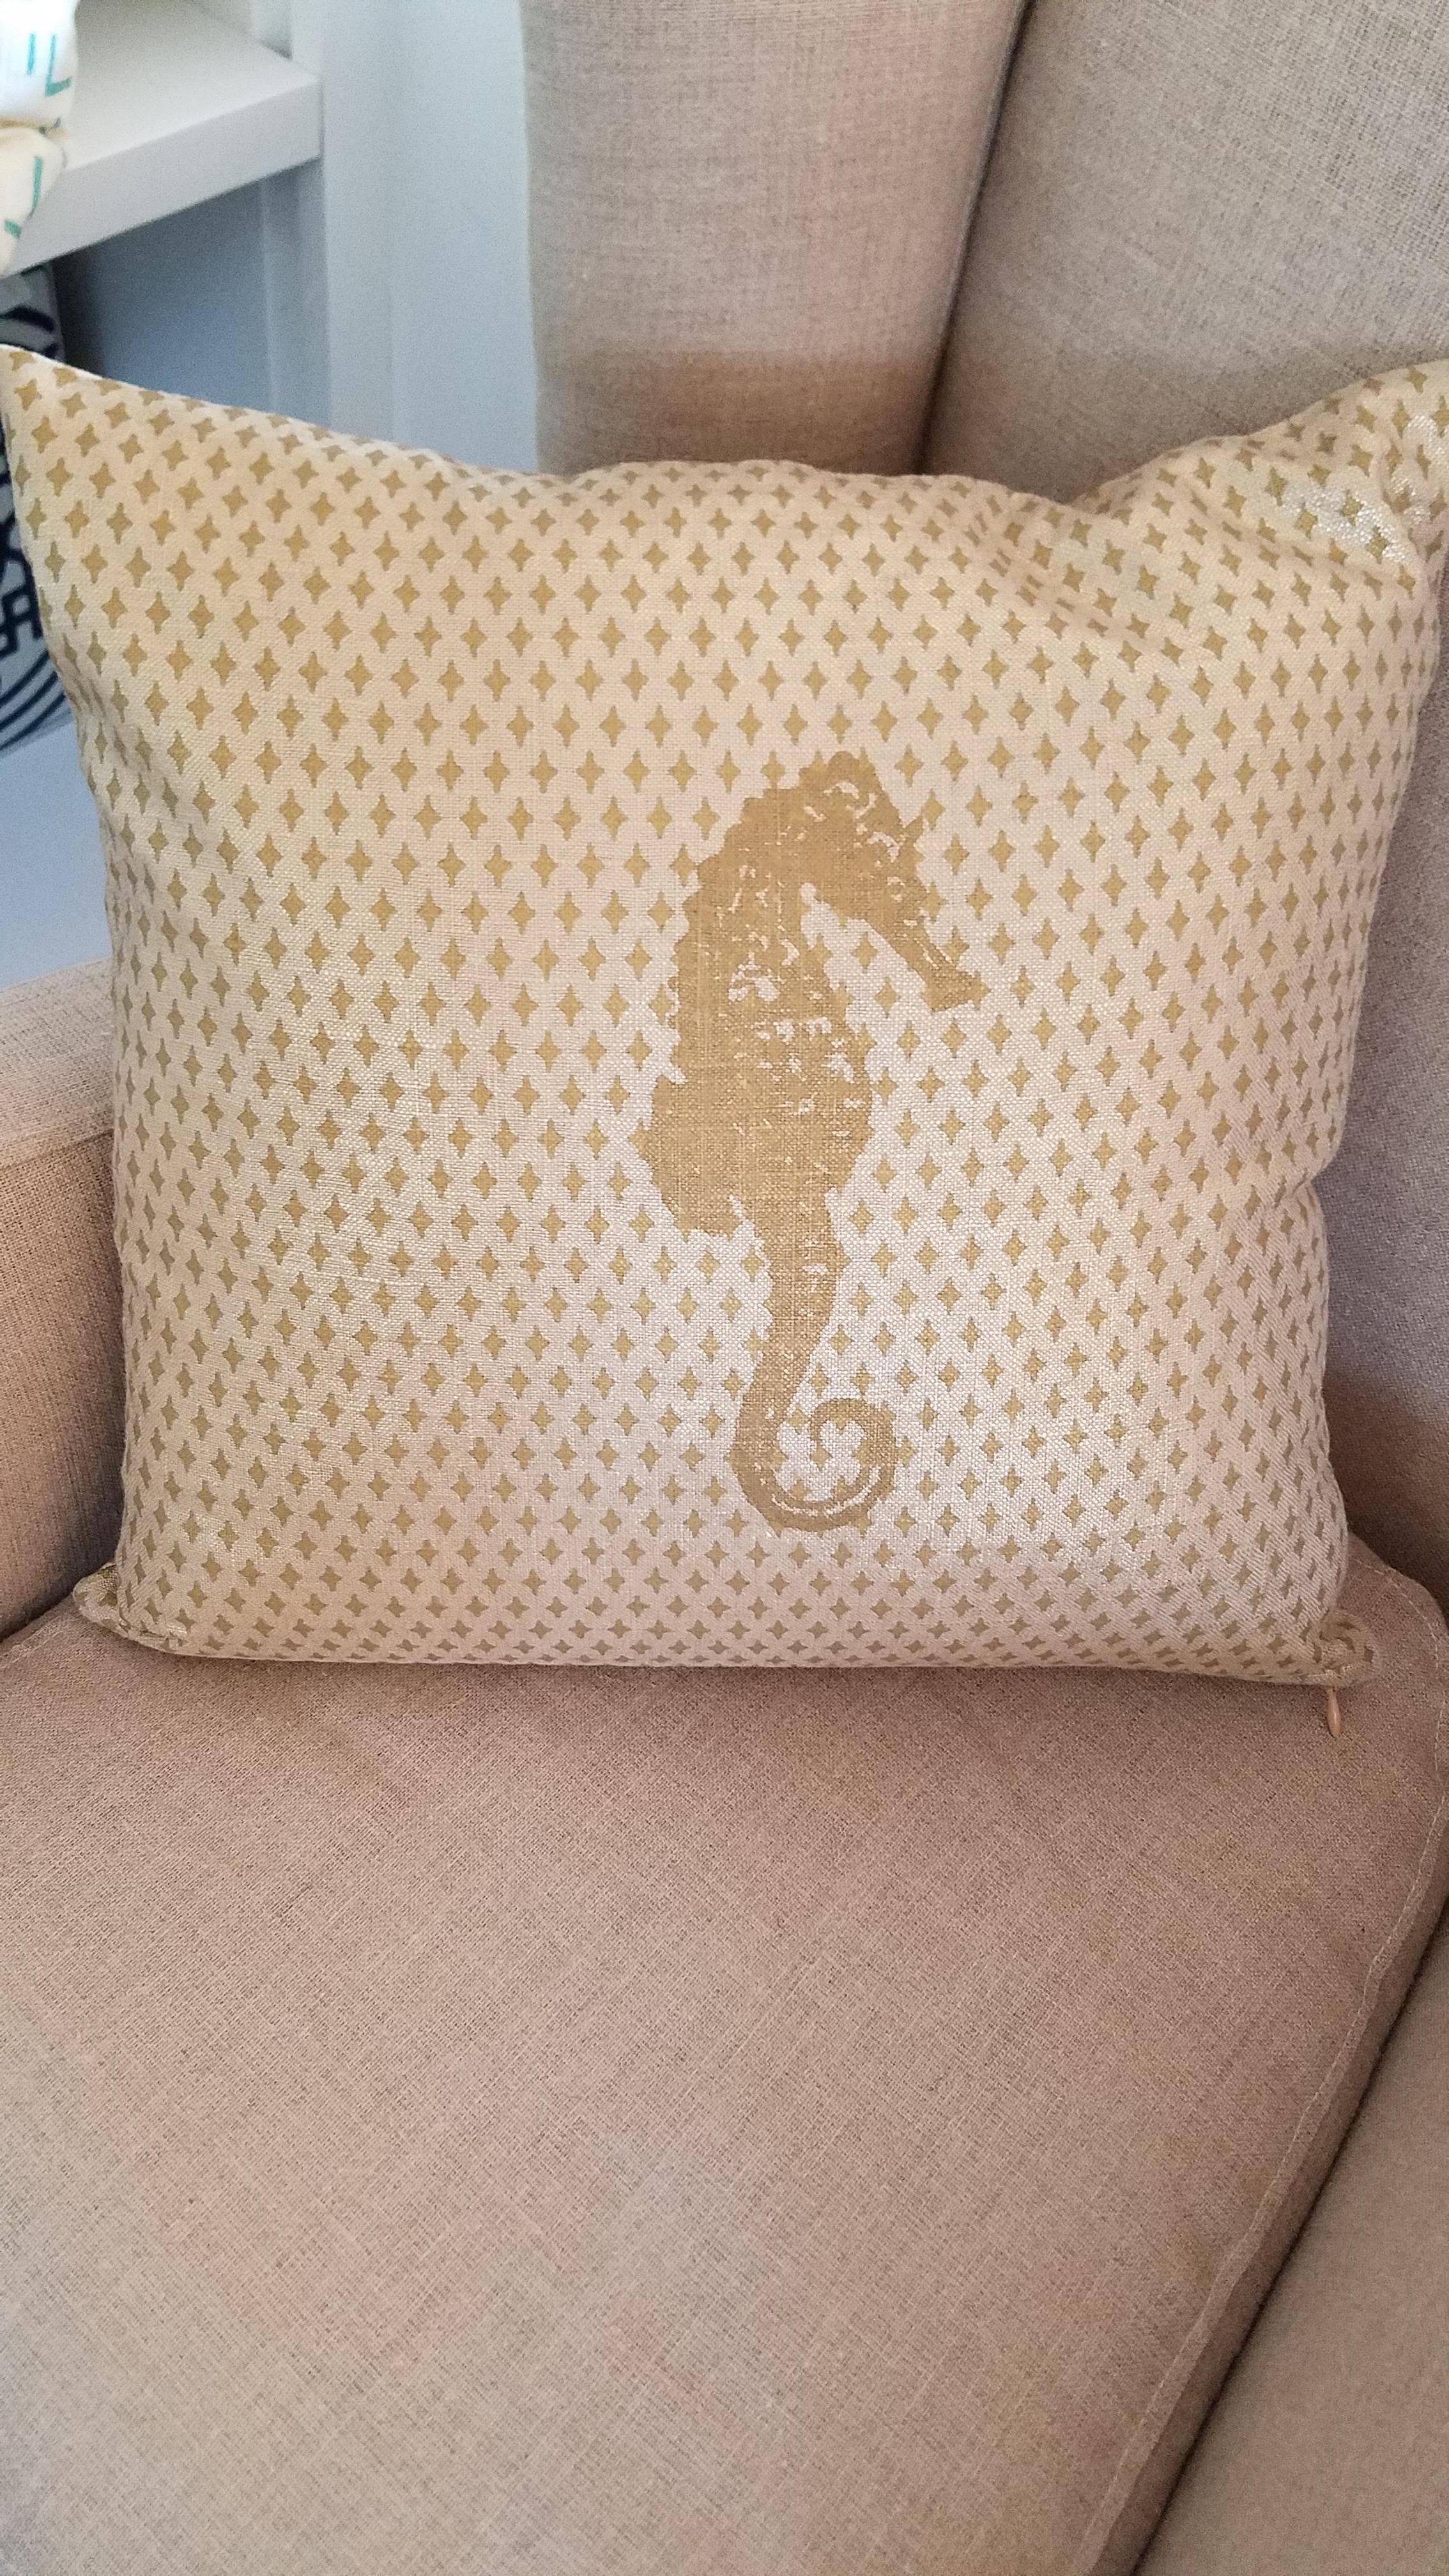 This pillow is silk screened on raw silk in gold featuring a sea horse in a field of regular geometric elements. One of a kind. Insert is poly/dac. Made in USA.